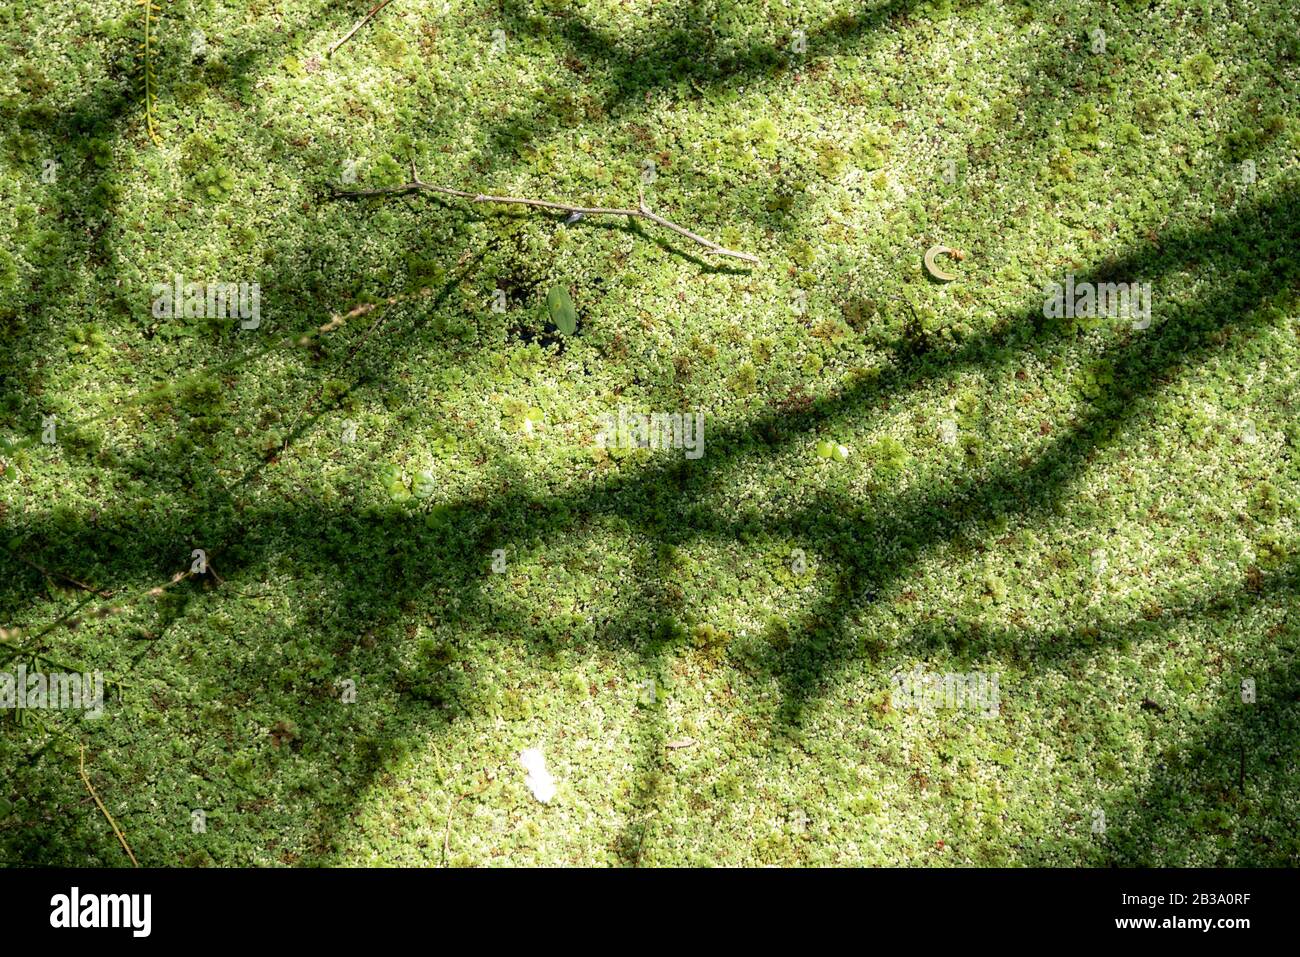 Duckweed growing on a swamp and shadows of branches on it. Texture Stock Photo